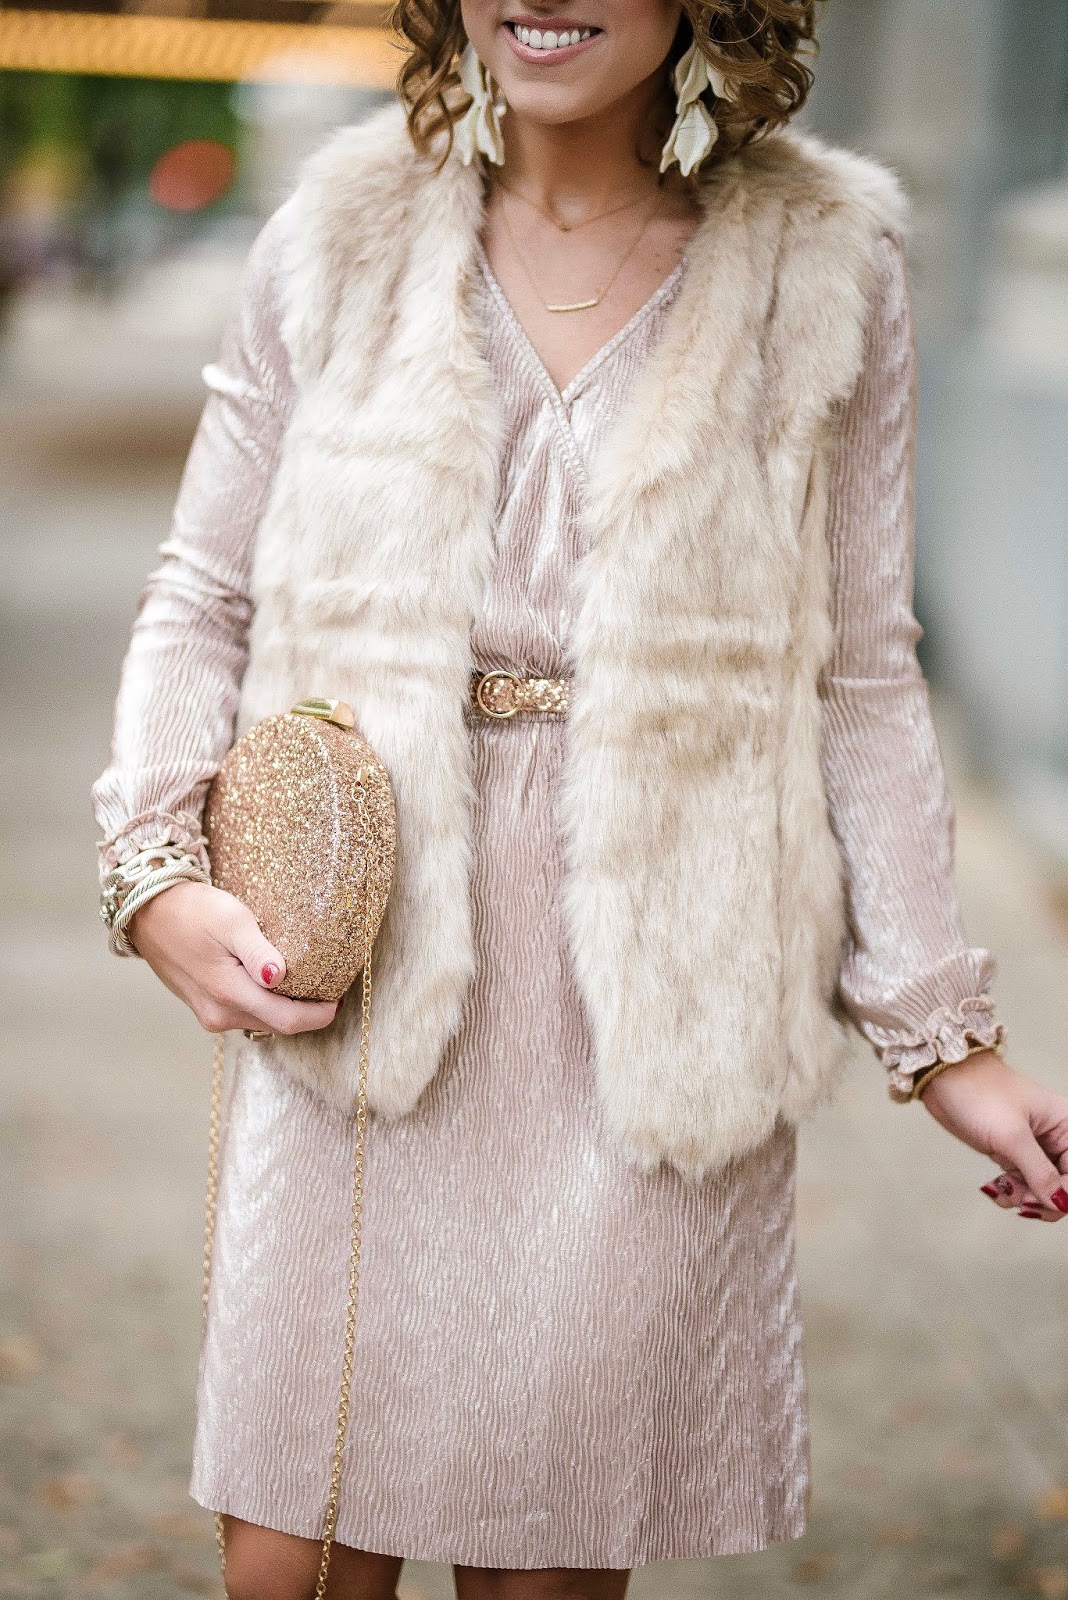 Pink Pleated Dress, Faux Fur Vest and Glitter Accessories - Something Delightful Blog